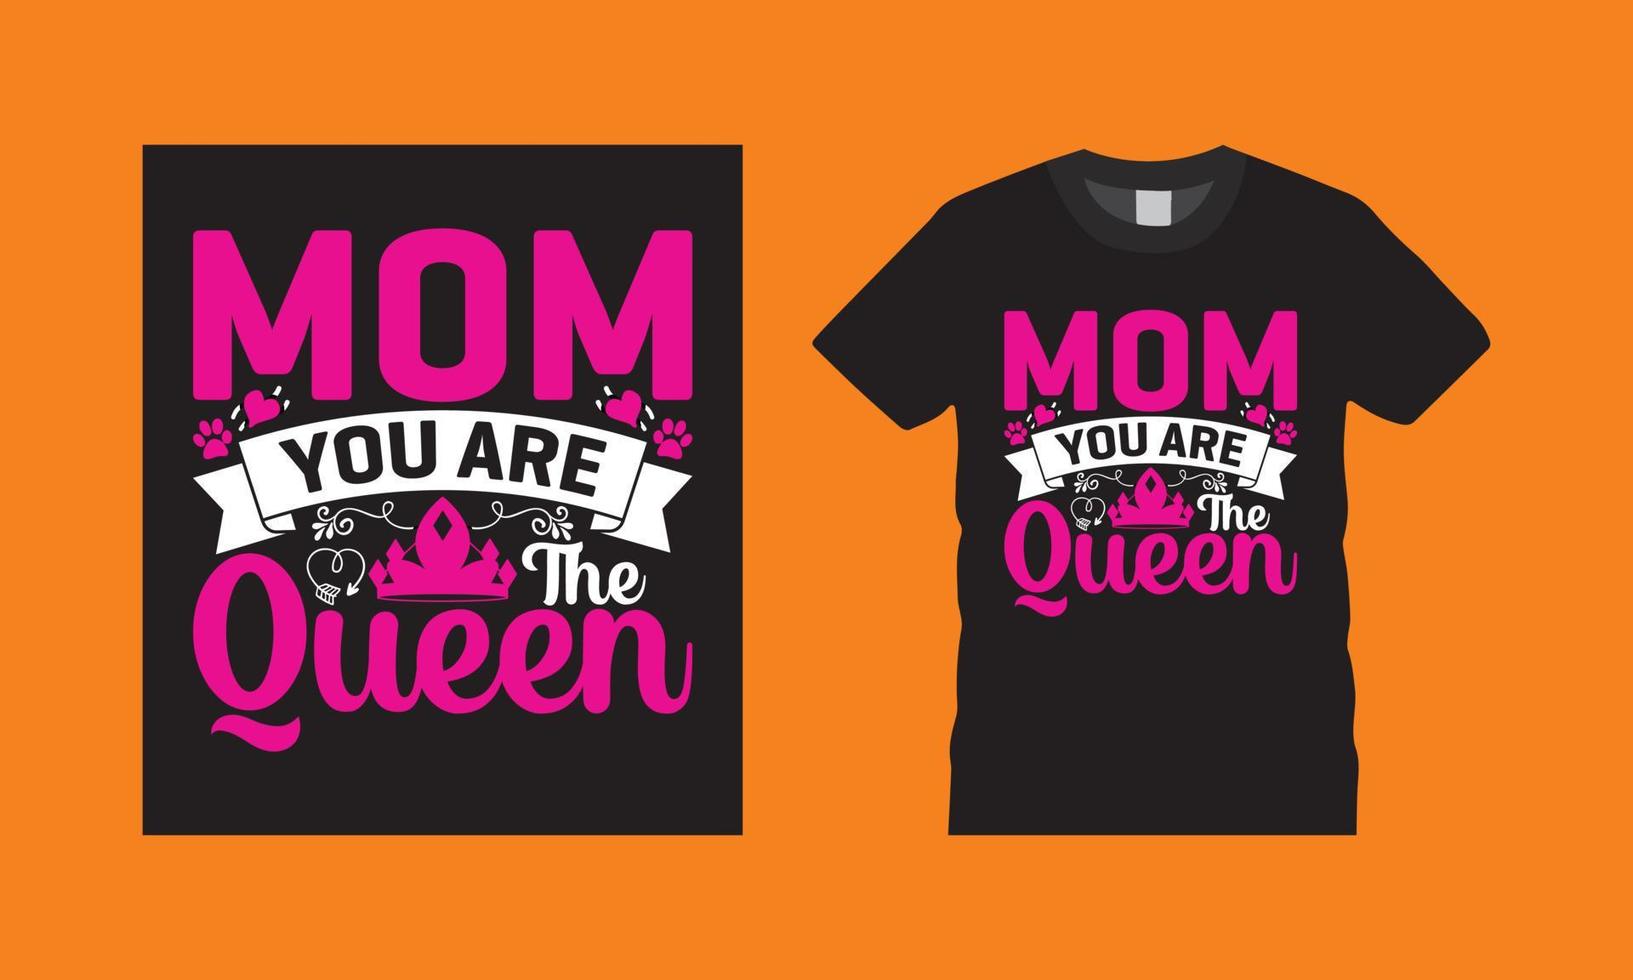 Mom you are the queen t shirt design. vector